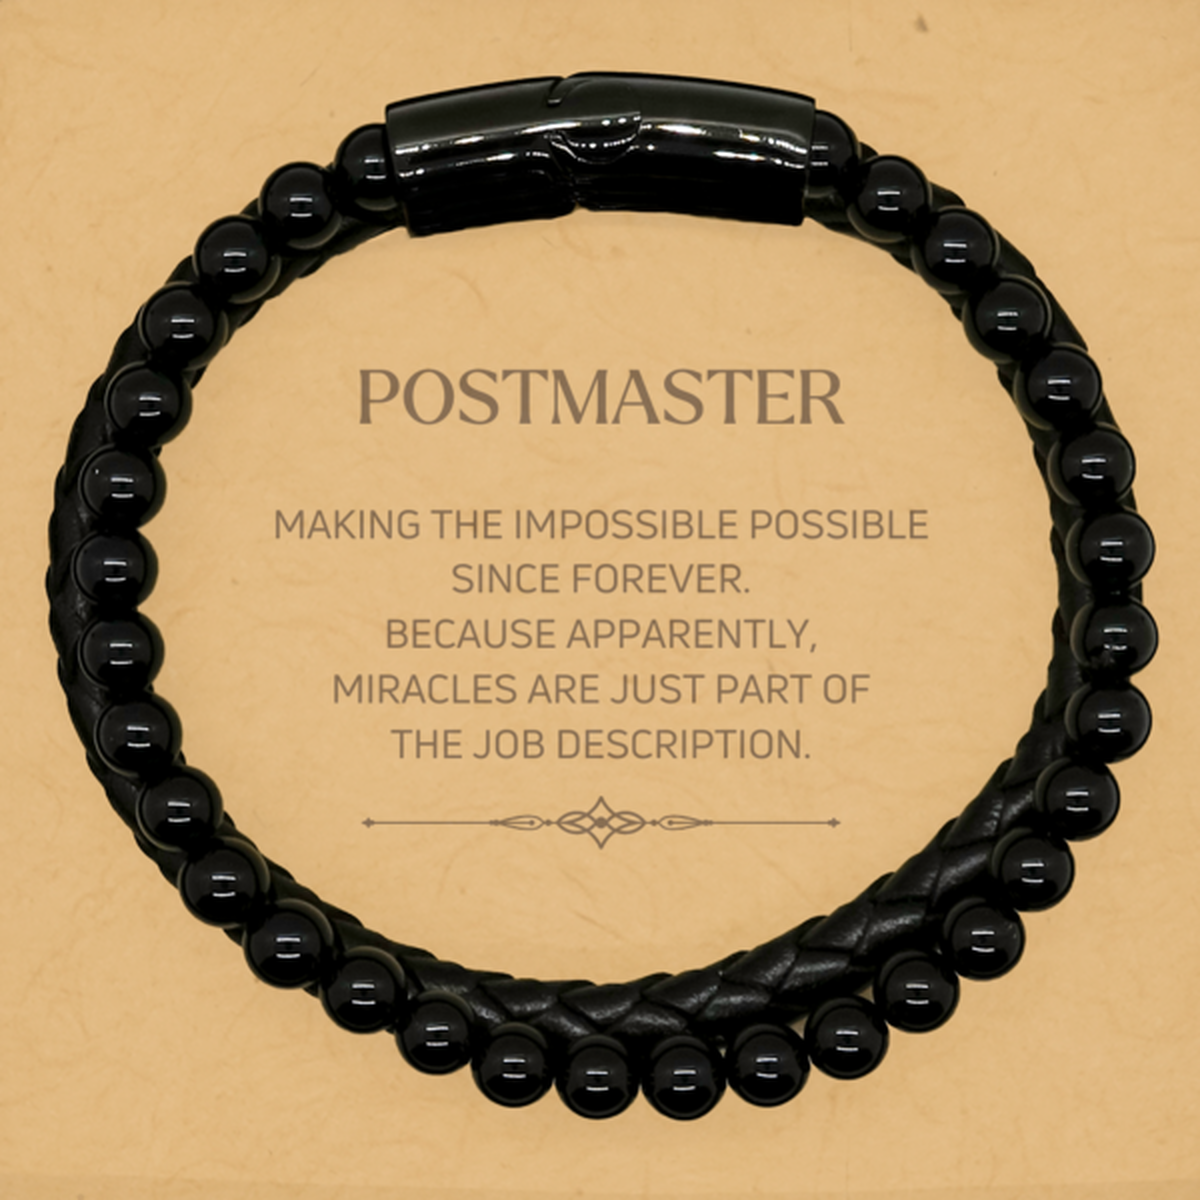 Funny Postmaster Gifts, Miracles are just part of the job description, Inspirational Birthday Stone Leather Bracelets For Postmaster, Men, Women, Coworkers, Friends, Boss